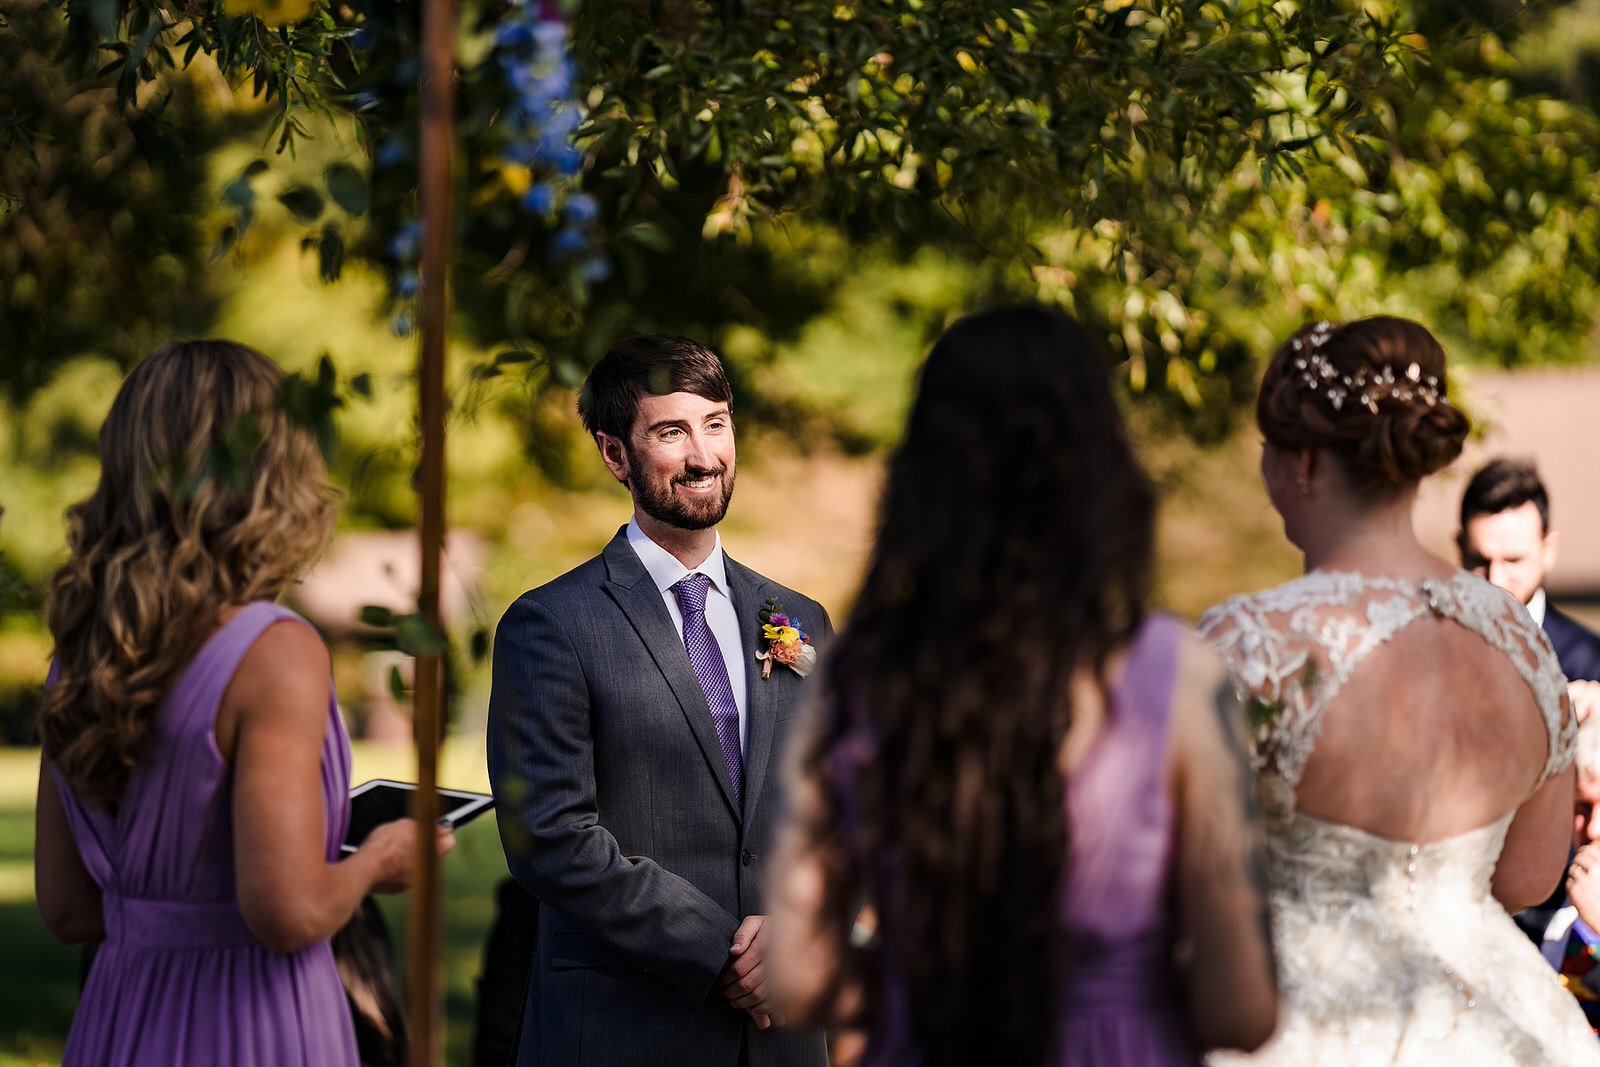 Groom looks lovingly at bride during wedding ceremony